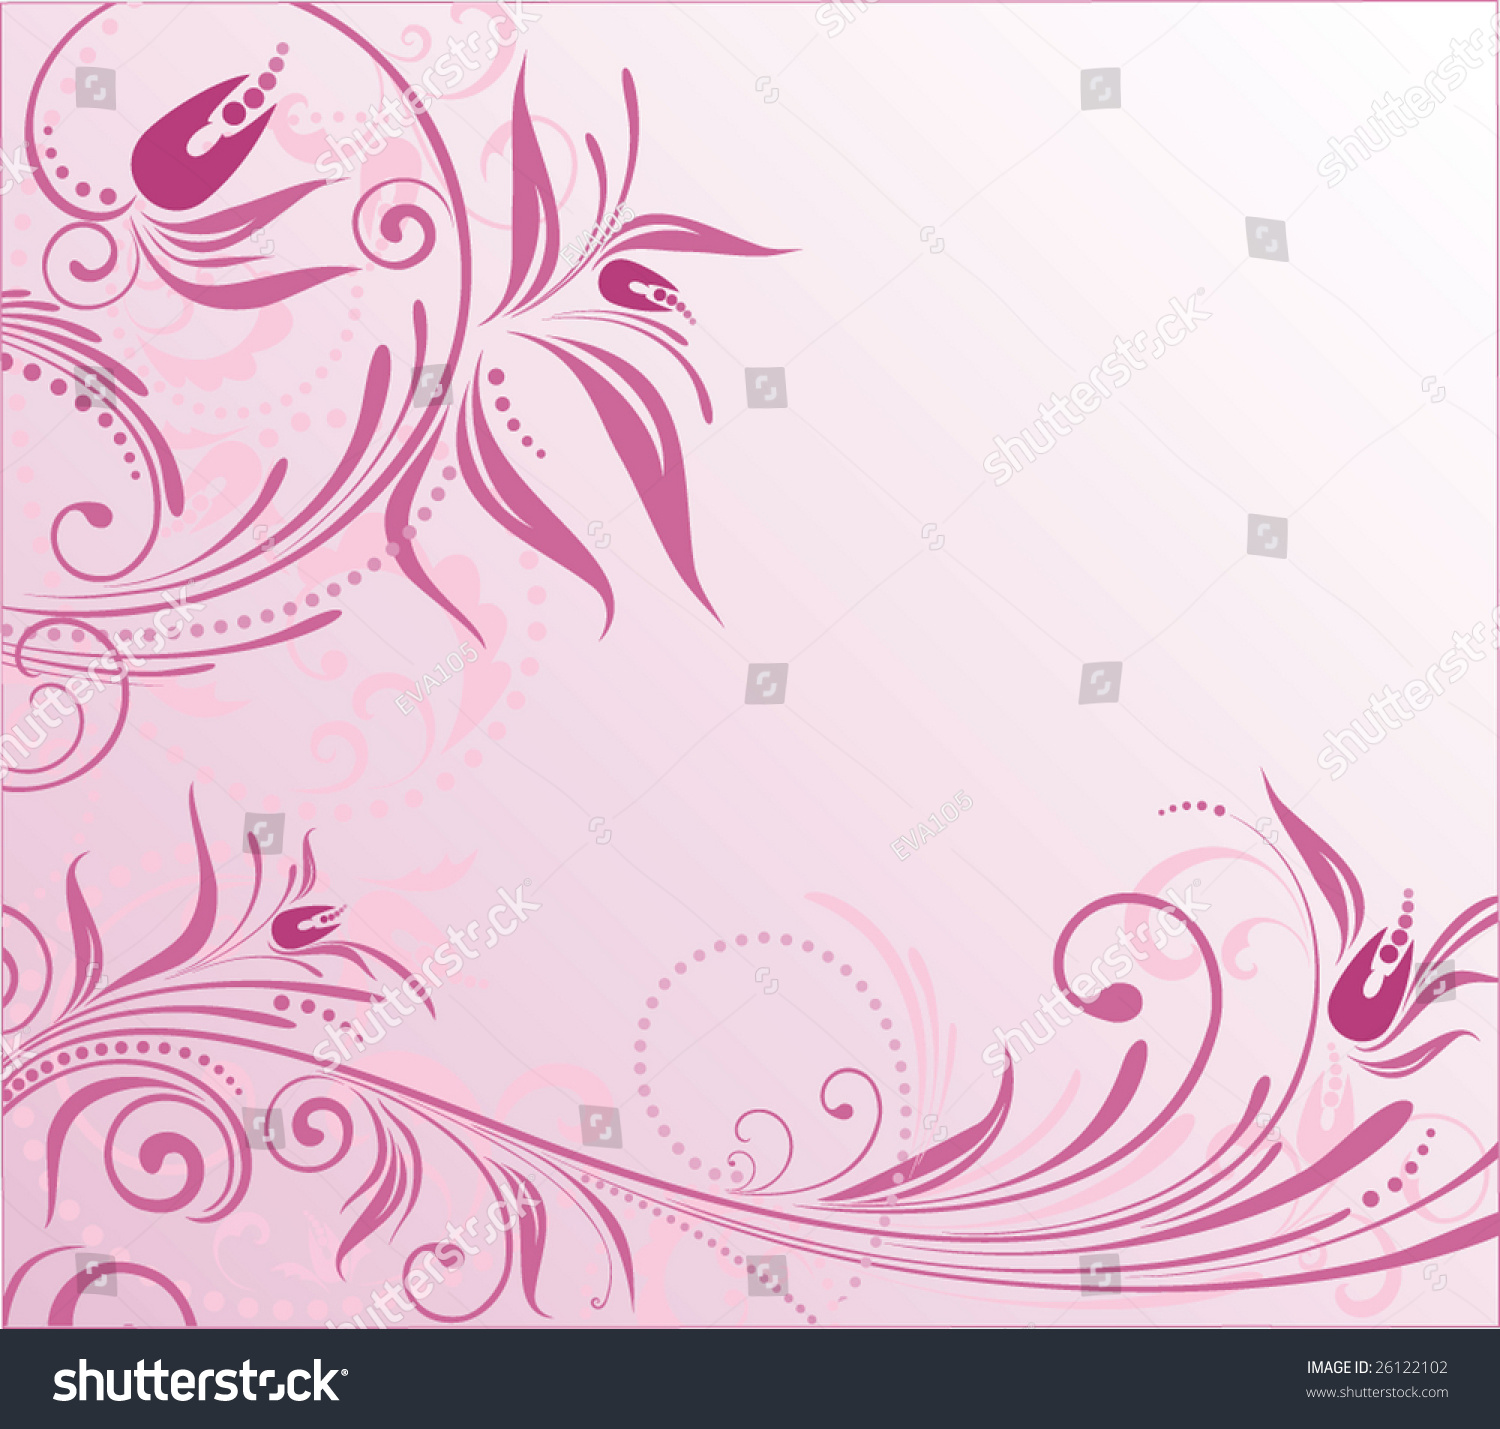 Abstract Floral Pink Background Stock Vector Illustration 26122102 ...